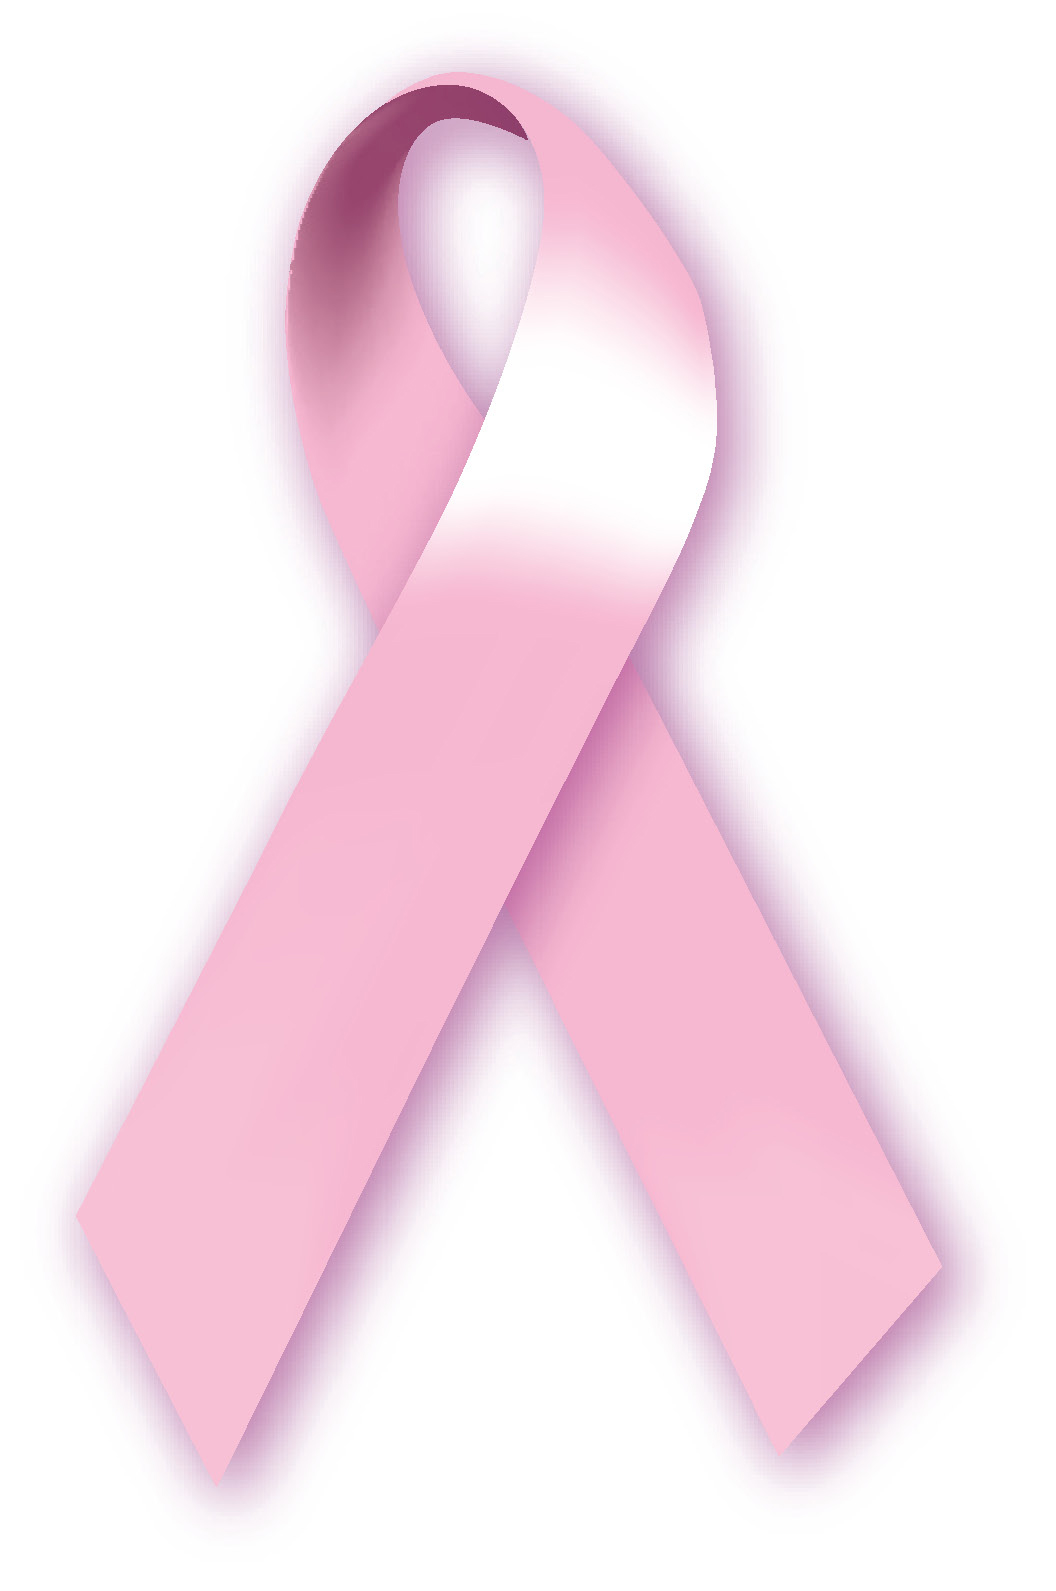 Breast Cancer Ribbon Vector Free Download